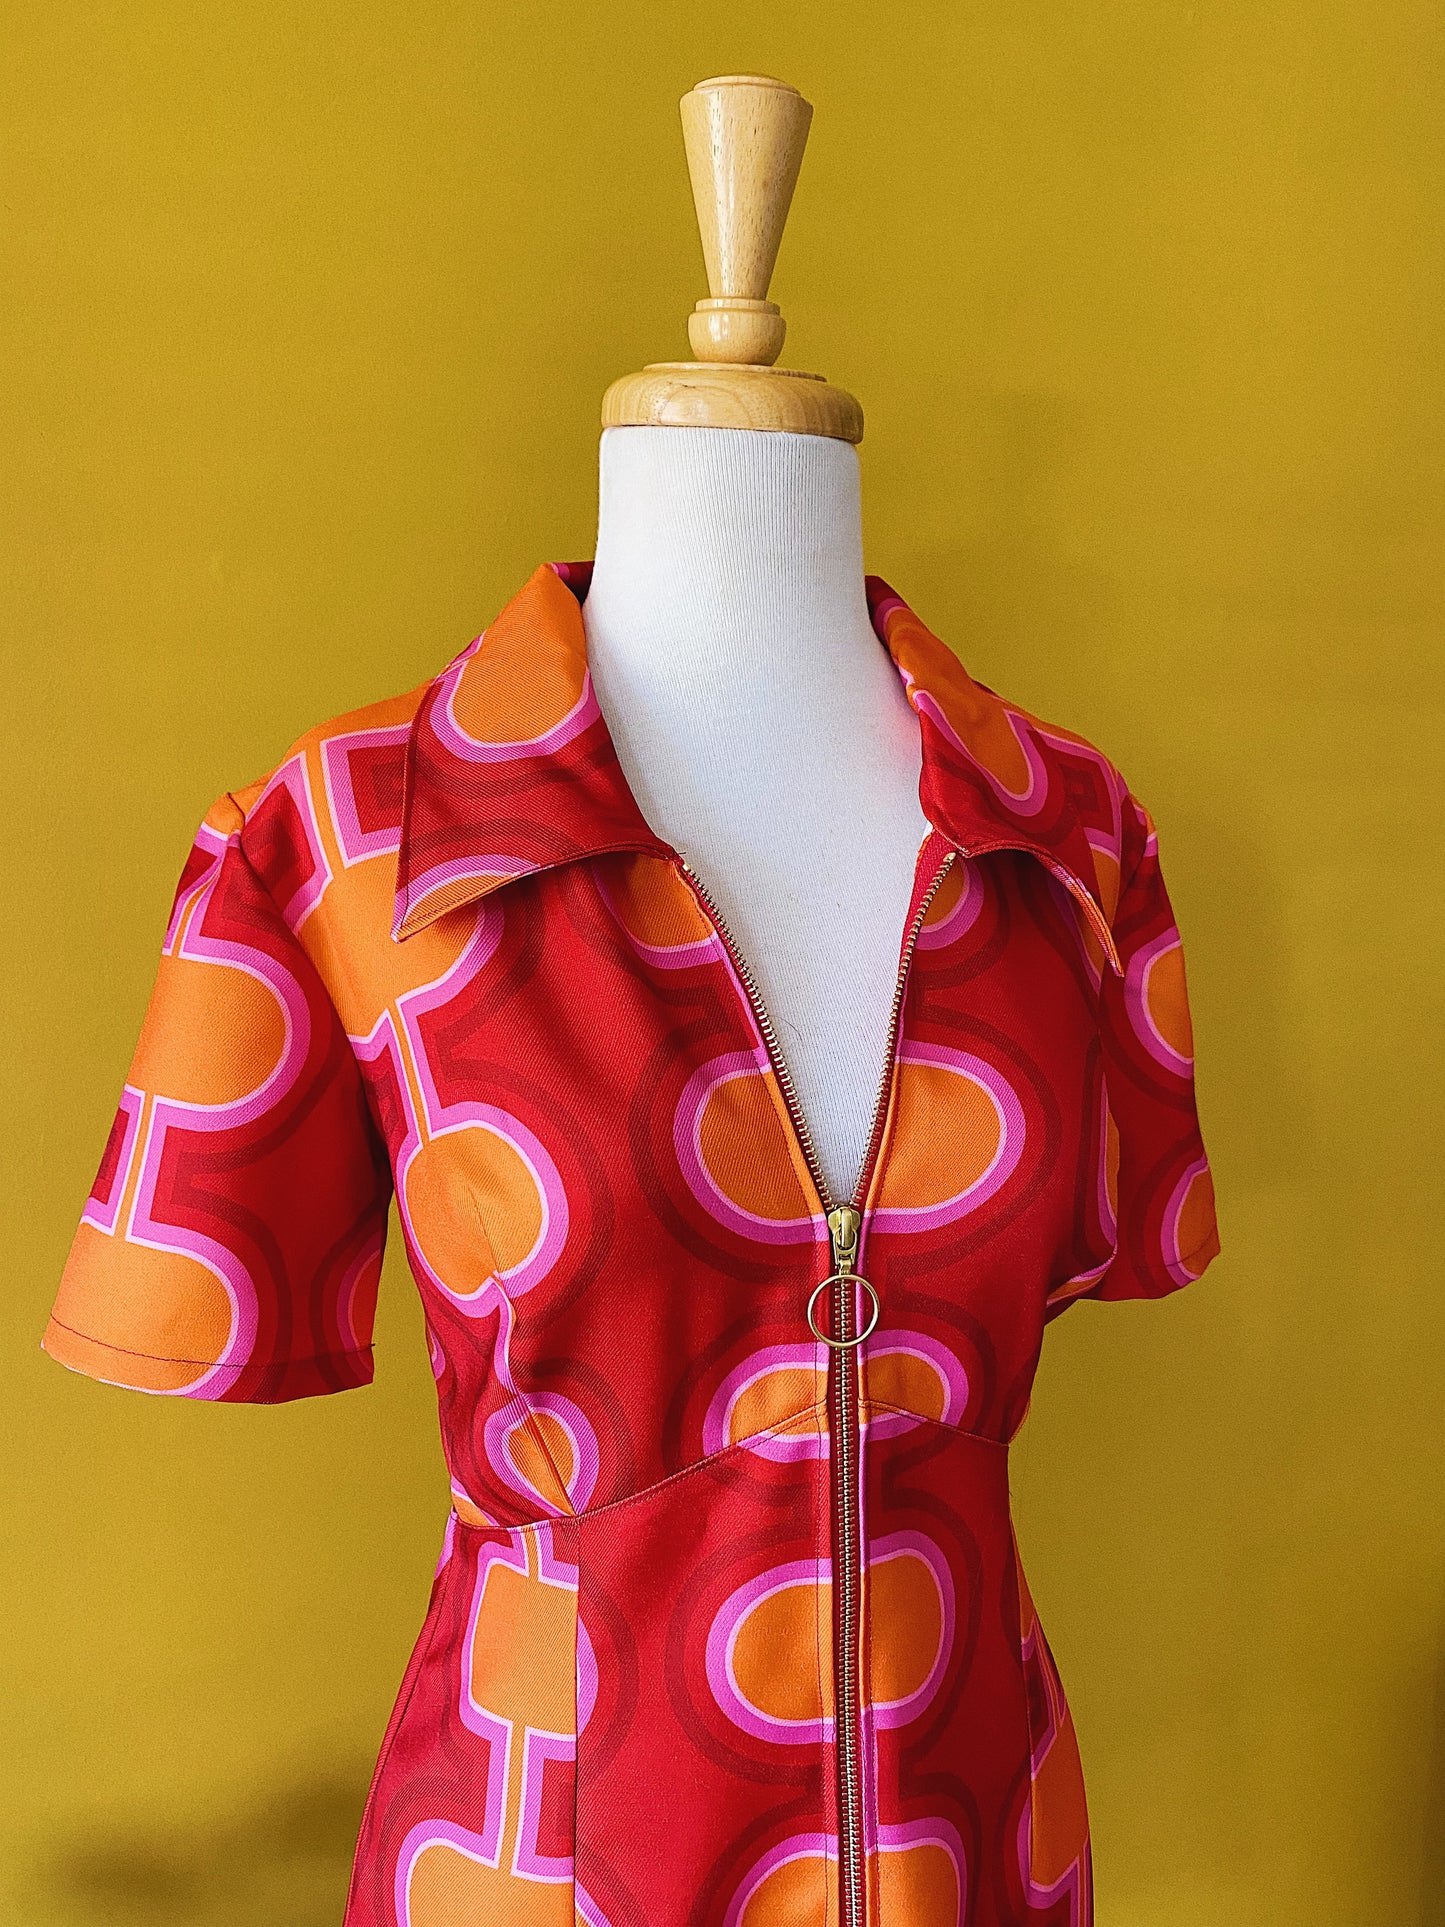 Short sleeve mini dress in retro 1960's 1980's red pink and orange print with gold zip and pointed collar.